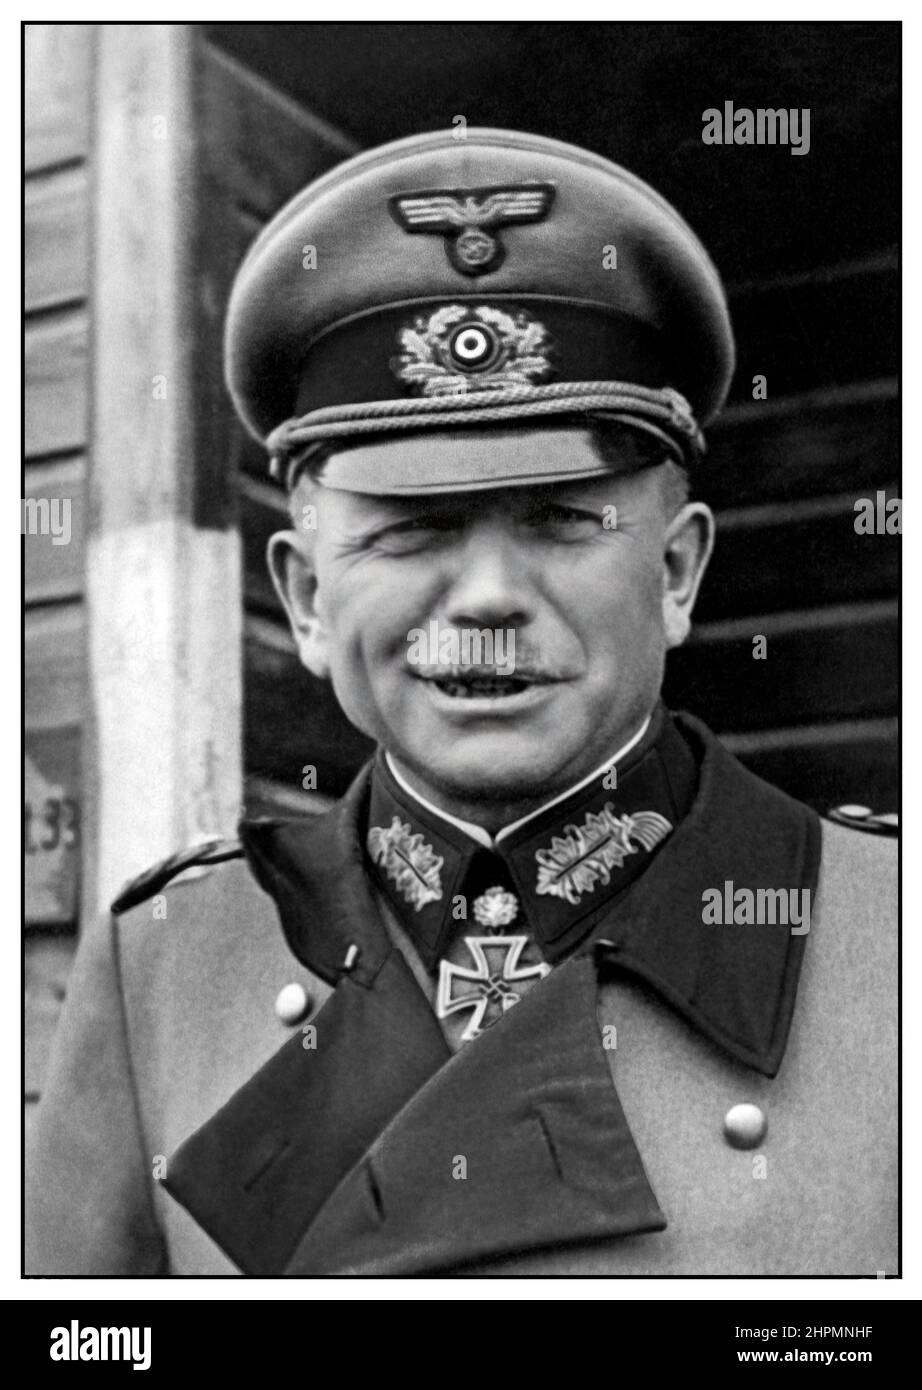 WW2 Nazi Wehrmacht General Heinz Guderian  Reportage Portrait 1944 Heinz Wilhelm Guderian was a German general during World War II who, after the war, became a successful memoirist and self-promoter. An early pioneer and advocate of the 'blitzkrieg' approach, he played a central role in the development of the Panzer division concept Stock Photo